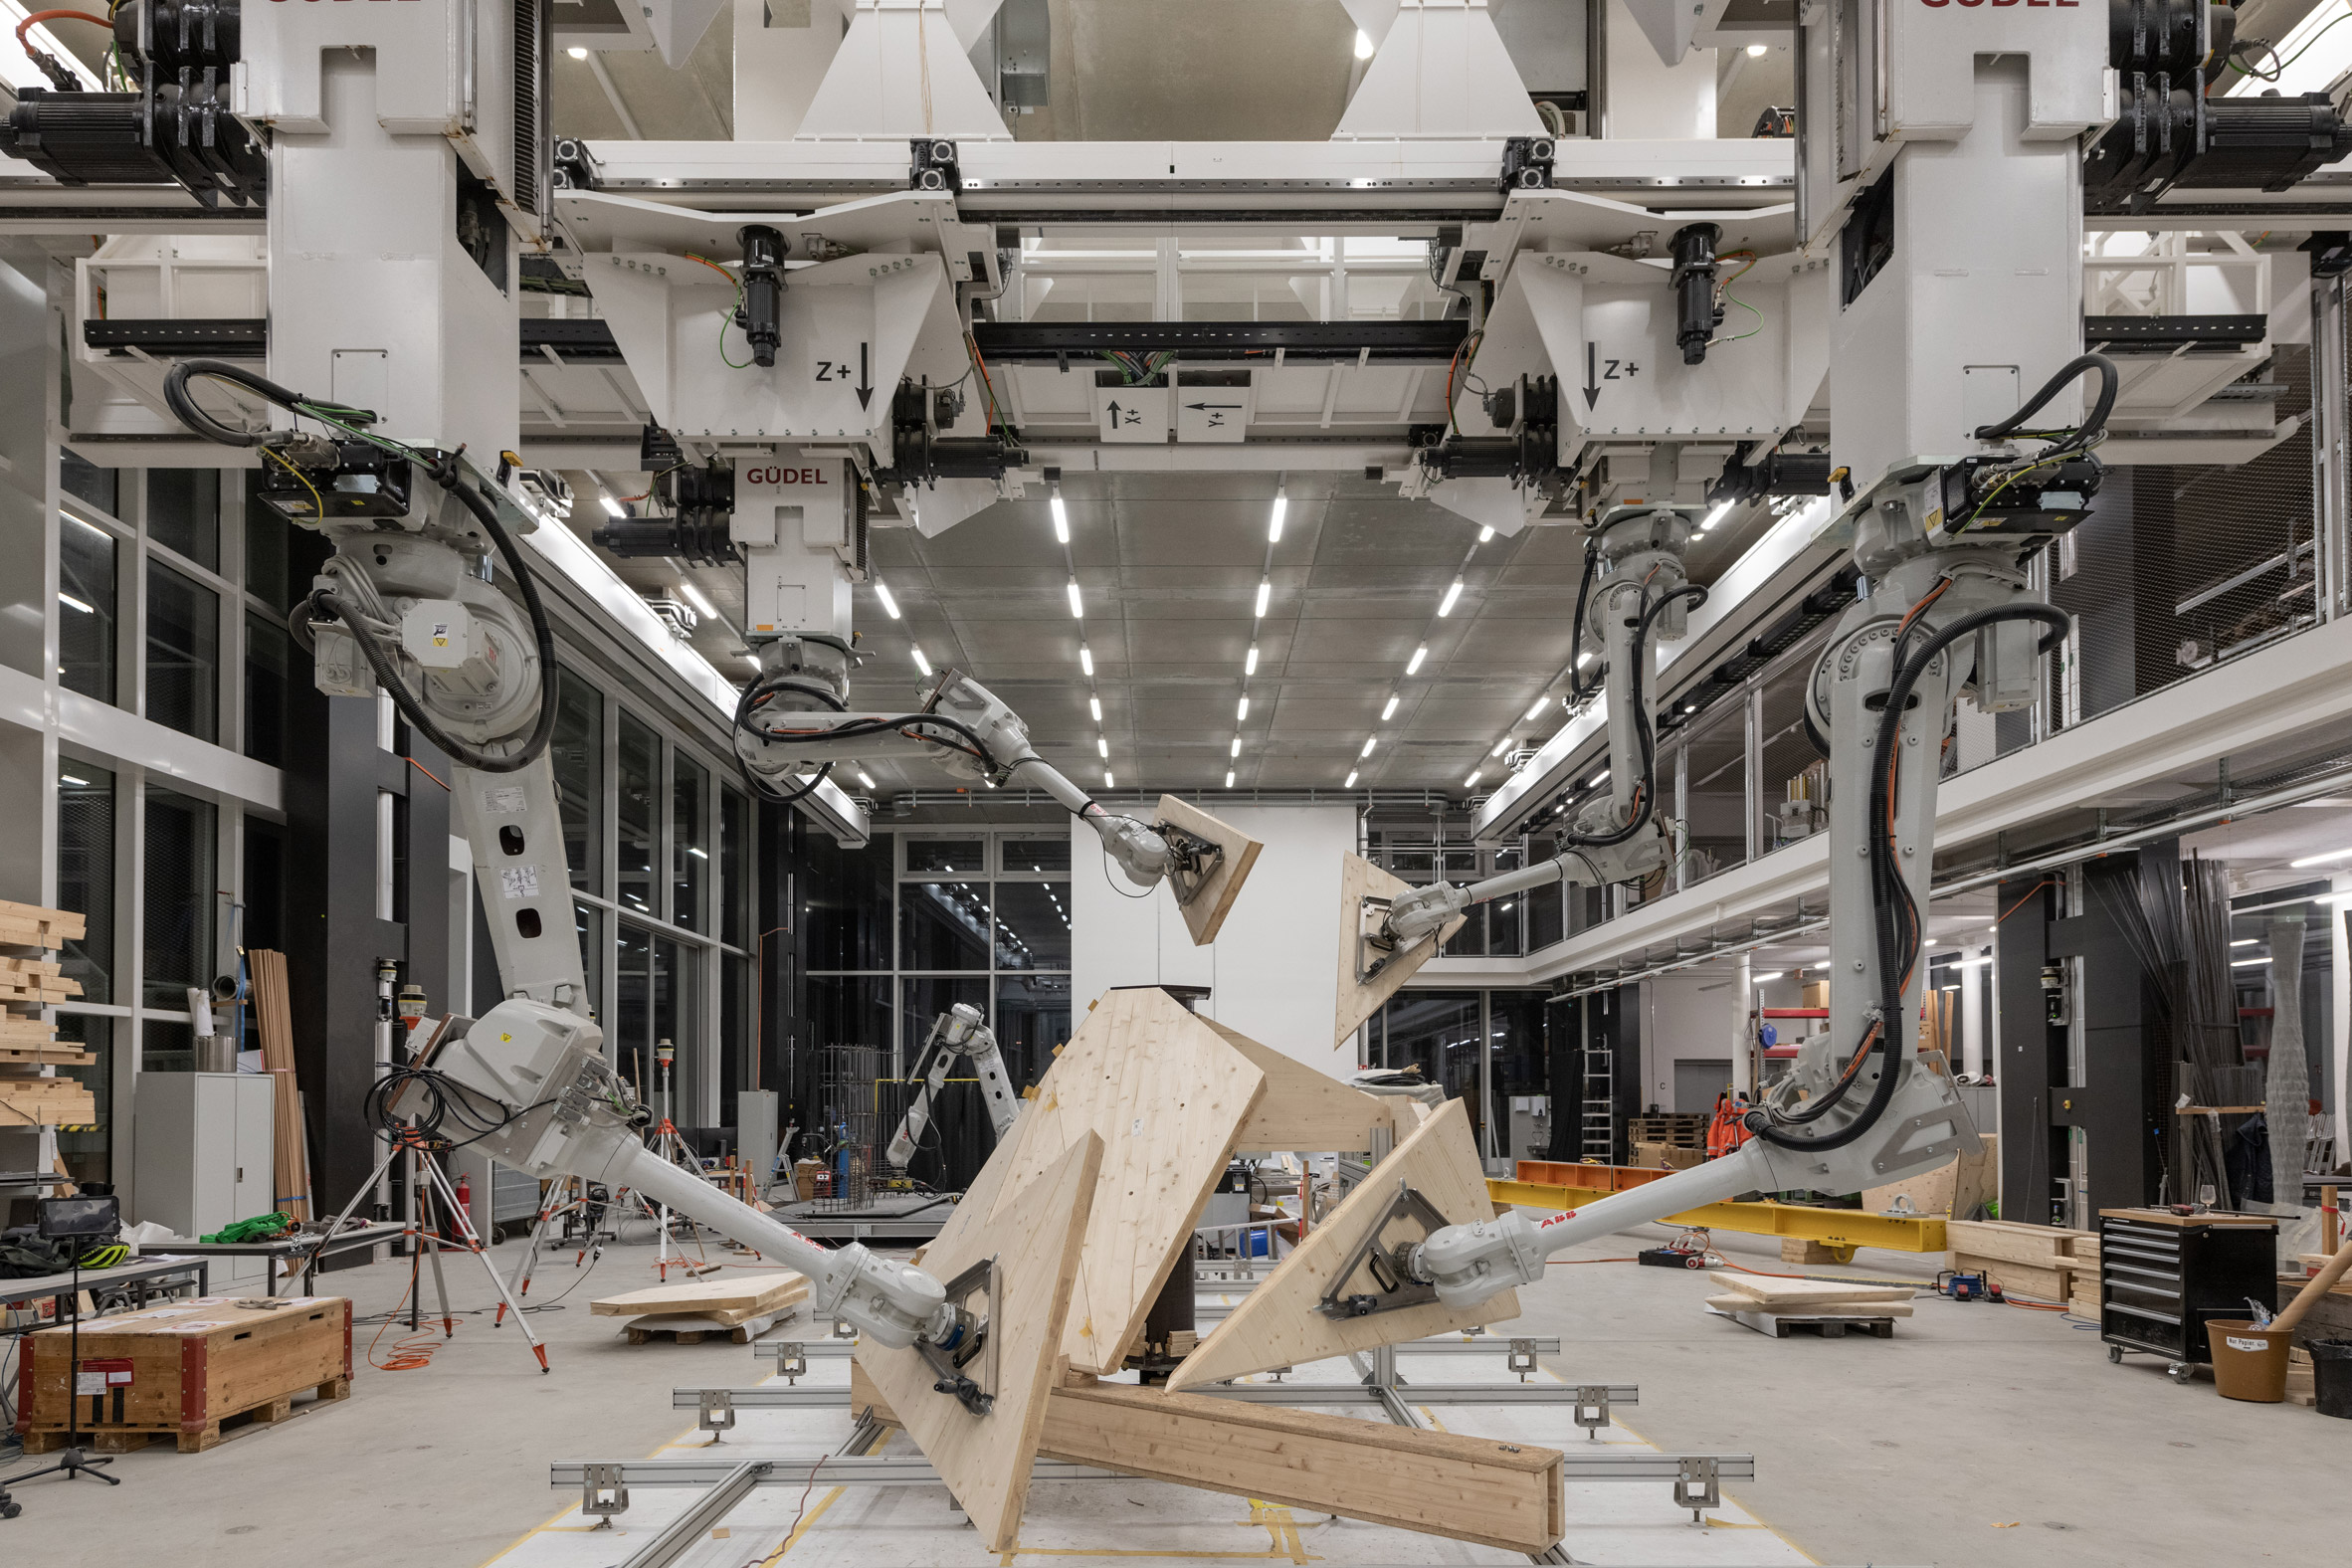 Robot arms move through the air holding wooden panels in a manufacturing centre